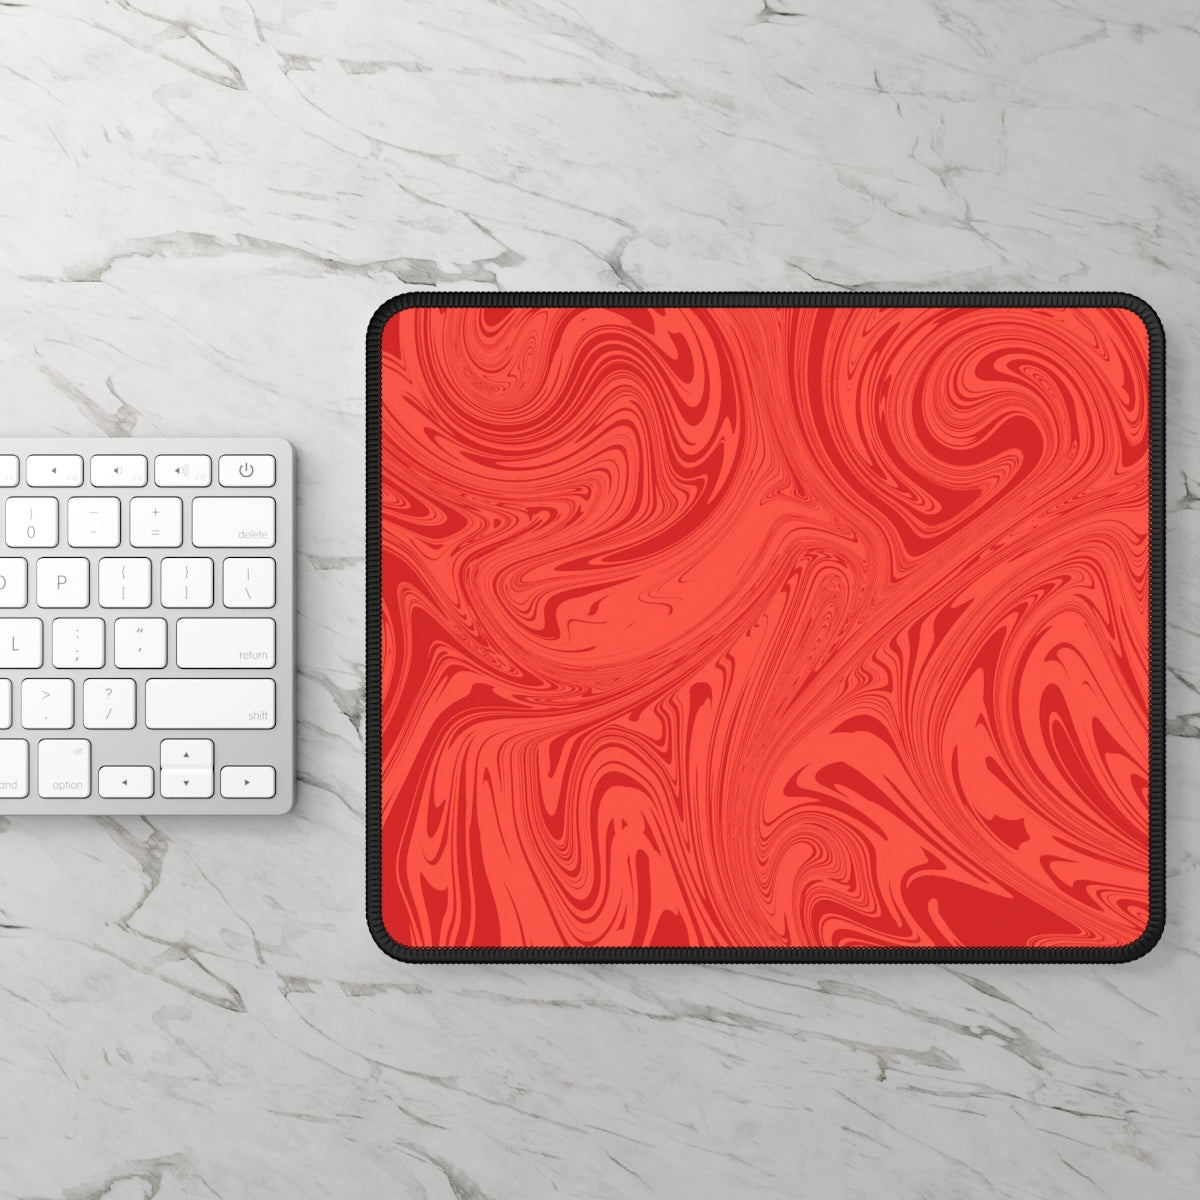 Red Swirl Gaming Mouse Pad - Desk Cookies